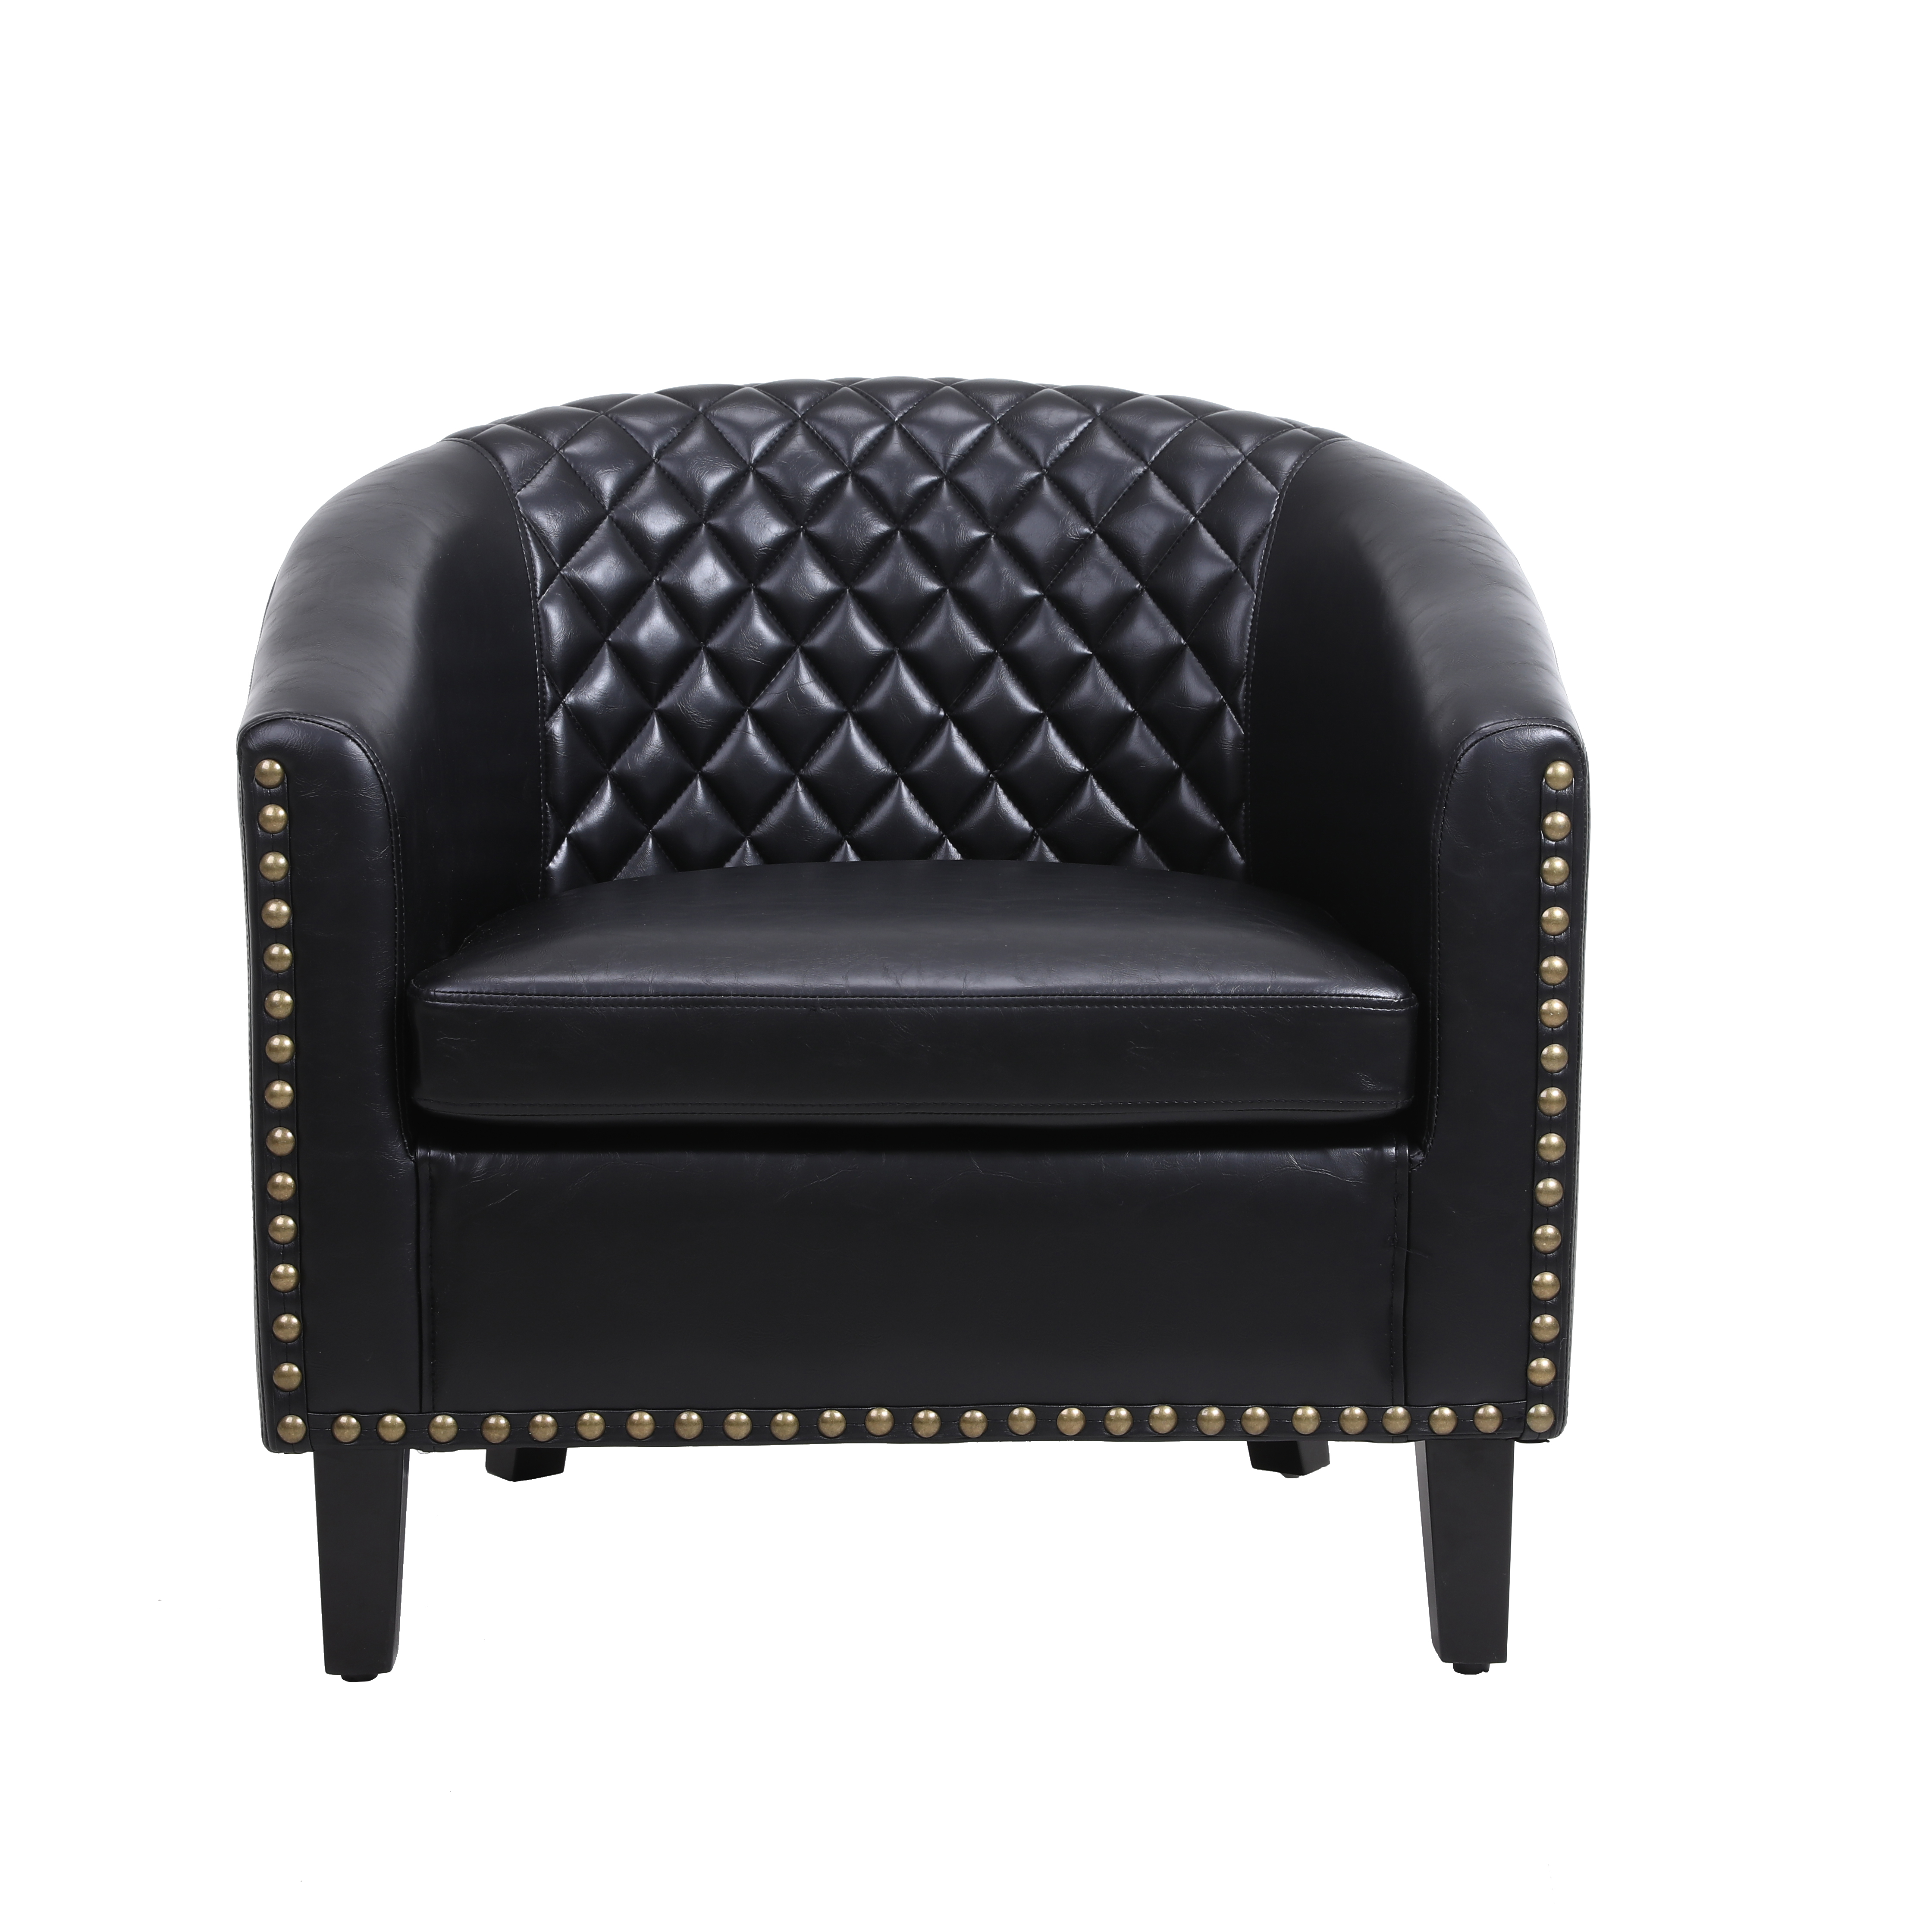 Modern Barrel Chair Tub Chair Faux Leather Club Chair with Arms and Nailheads, Upholstered Barrel Accent Chair for Living Room Bedroom - Black - image 4 of 8